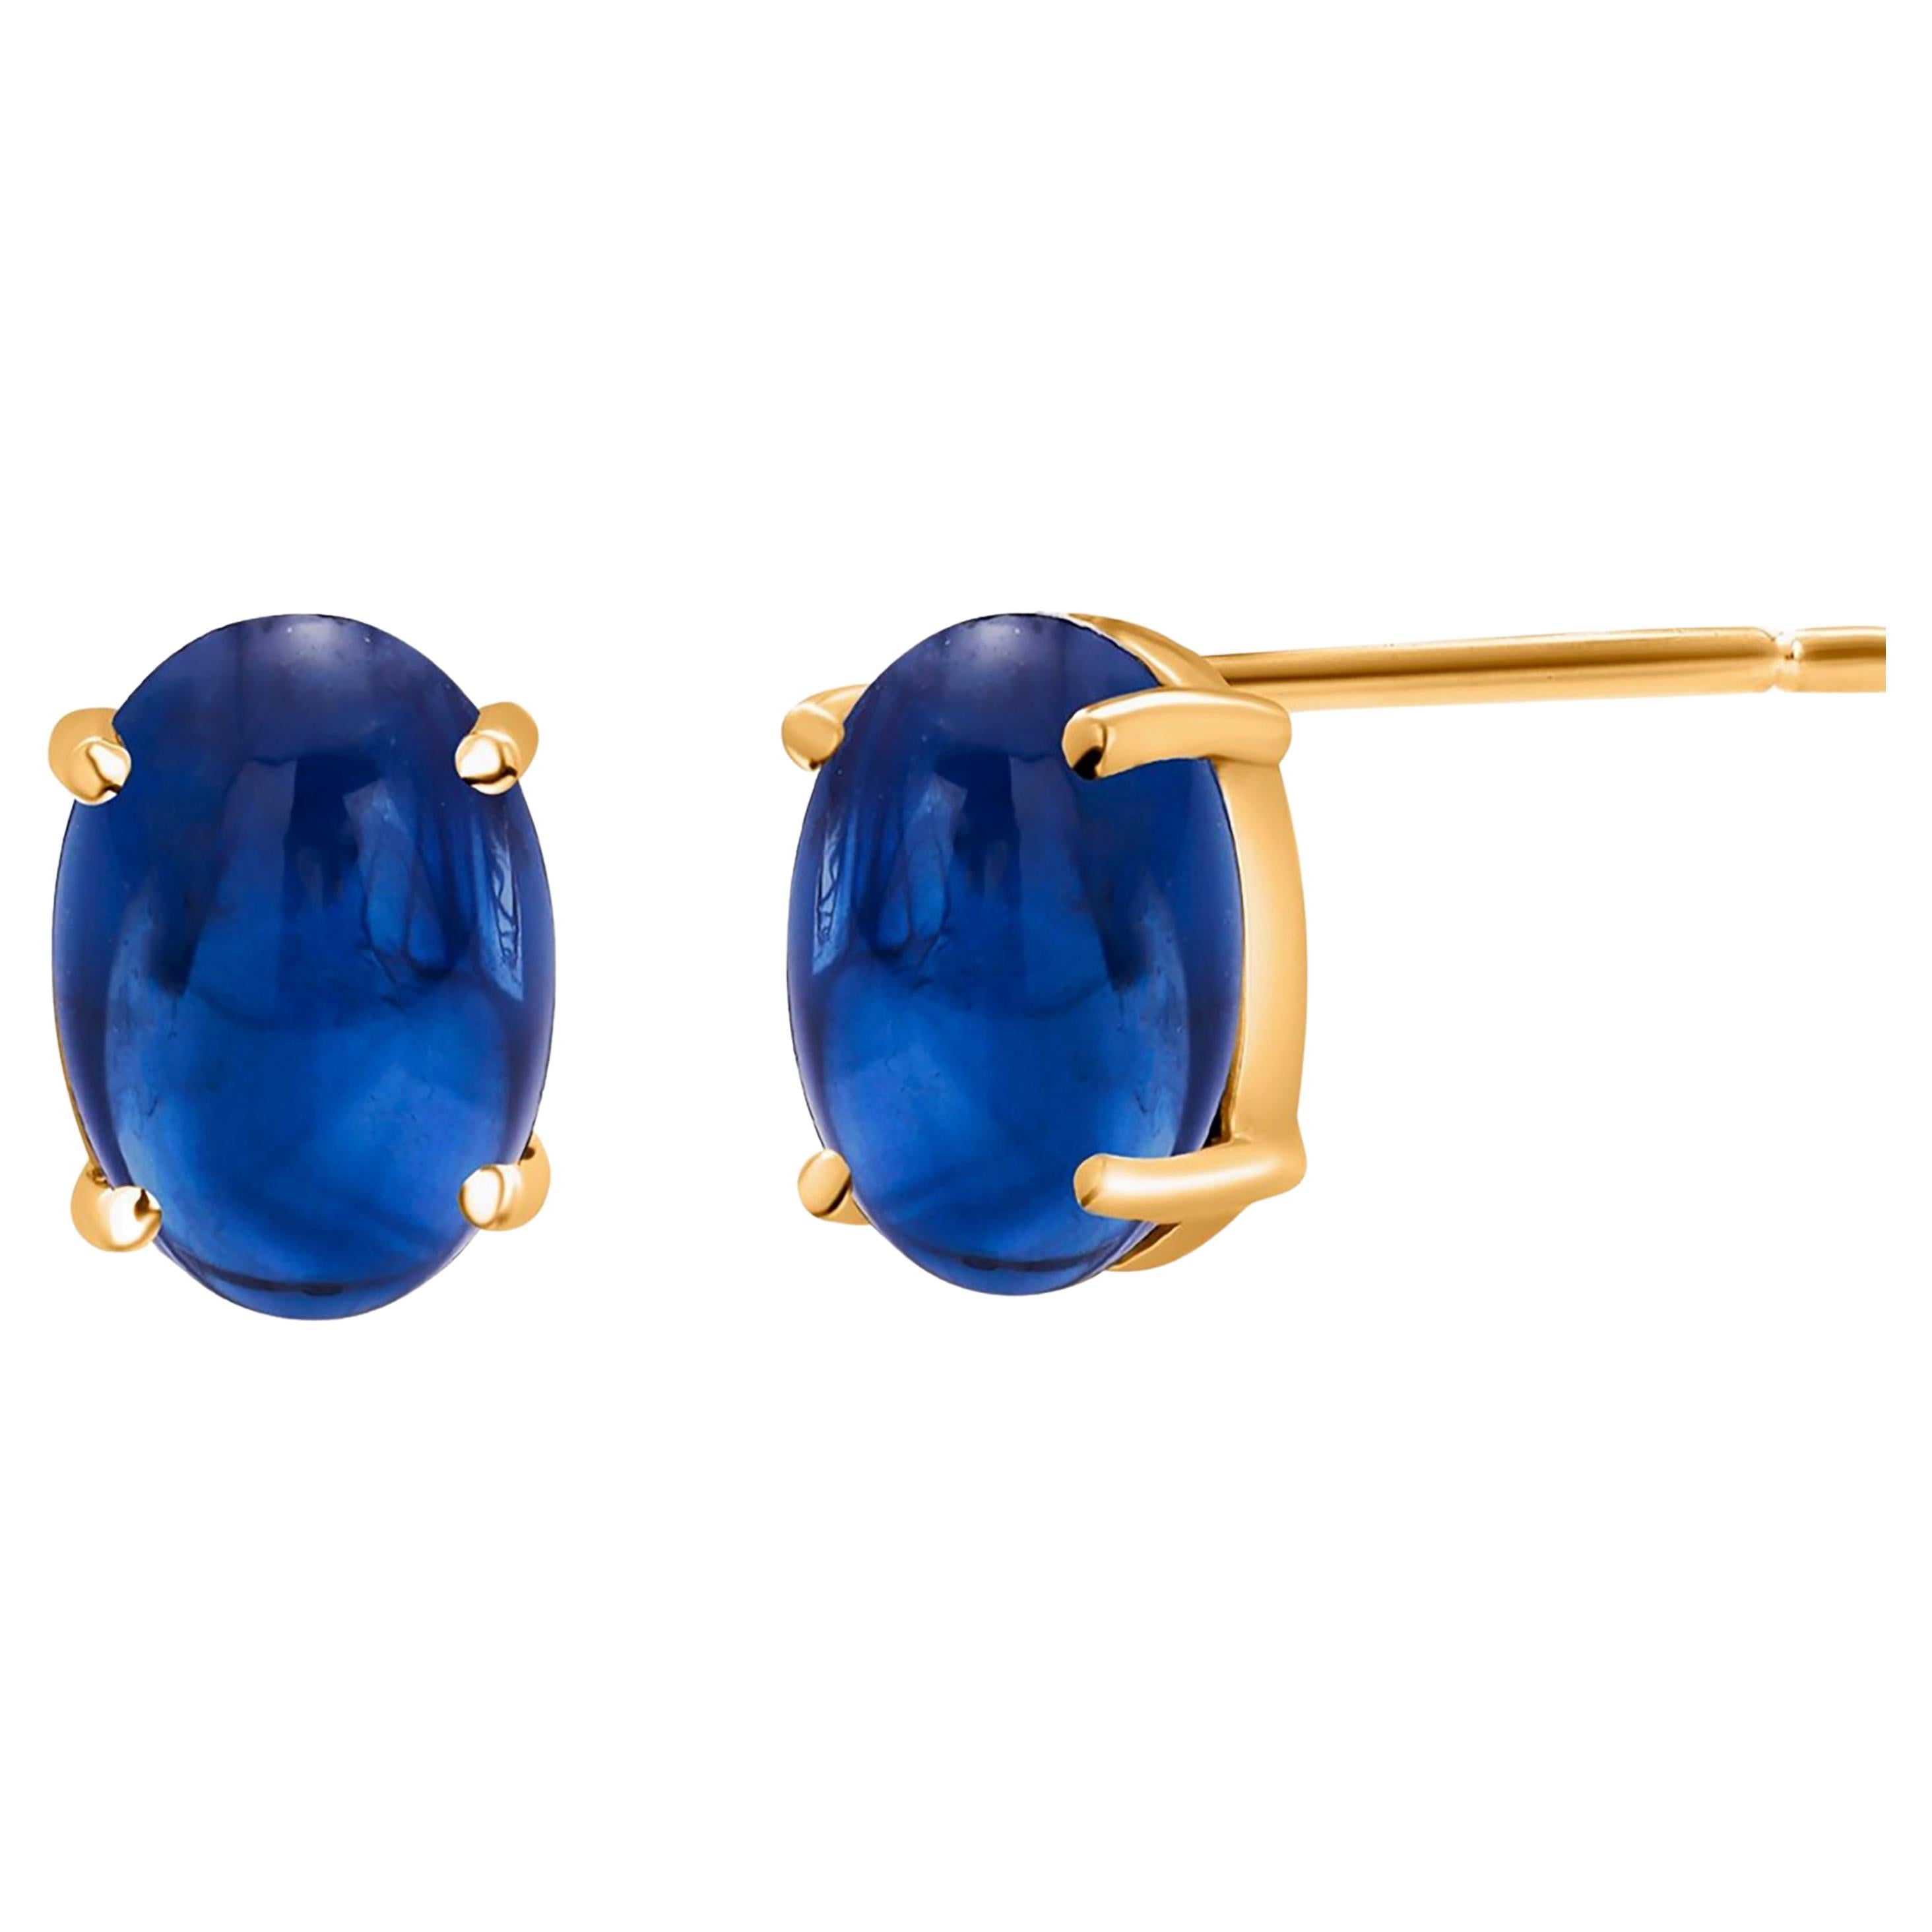 Matched Cabochon Sapphire 3.56 Carat 0.31 X 0.23 Inch Yellow Gold Stud Earrings For Sale